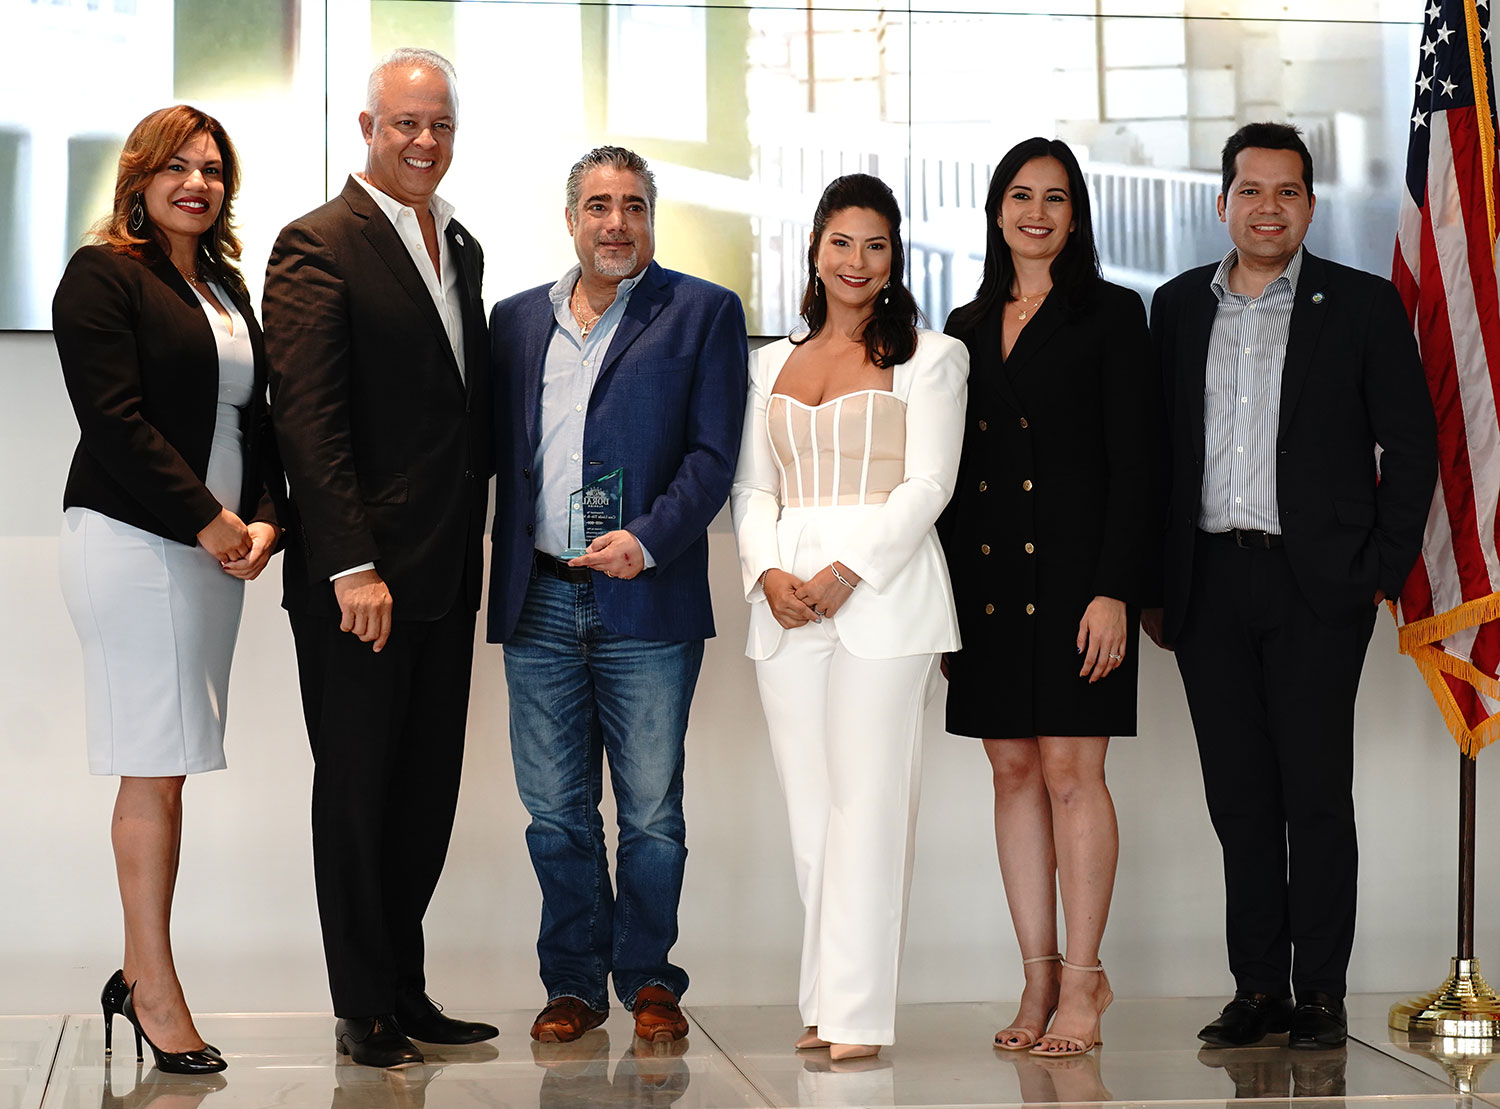 Doral Honors 20 Year Businesses!